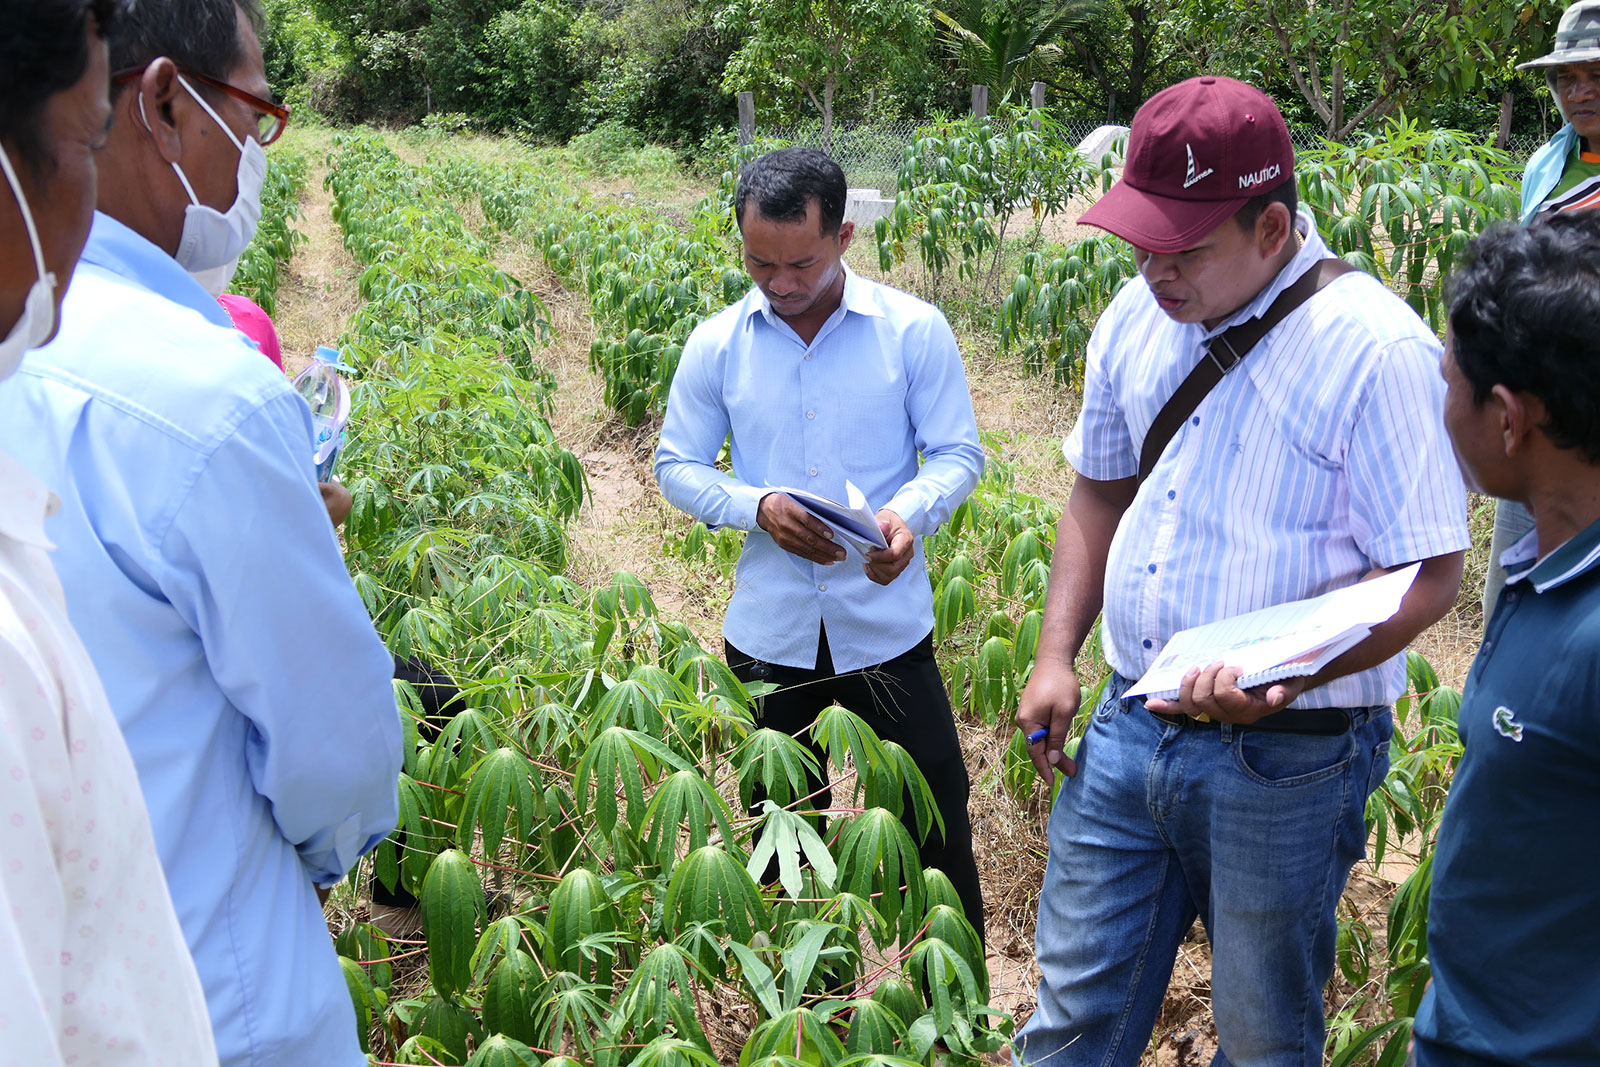 Farmers being trained in identifying Pests and Diseases in Cassava Fields (KH). Copyright: GIZ/CRAS